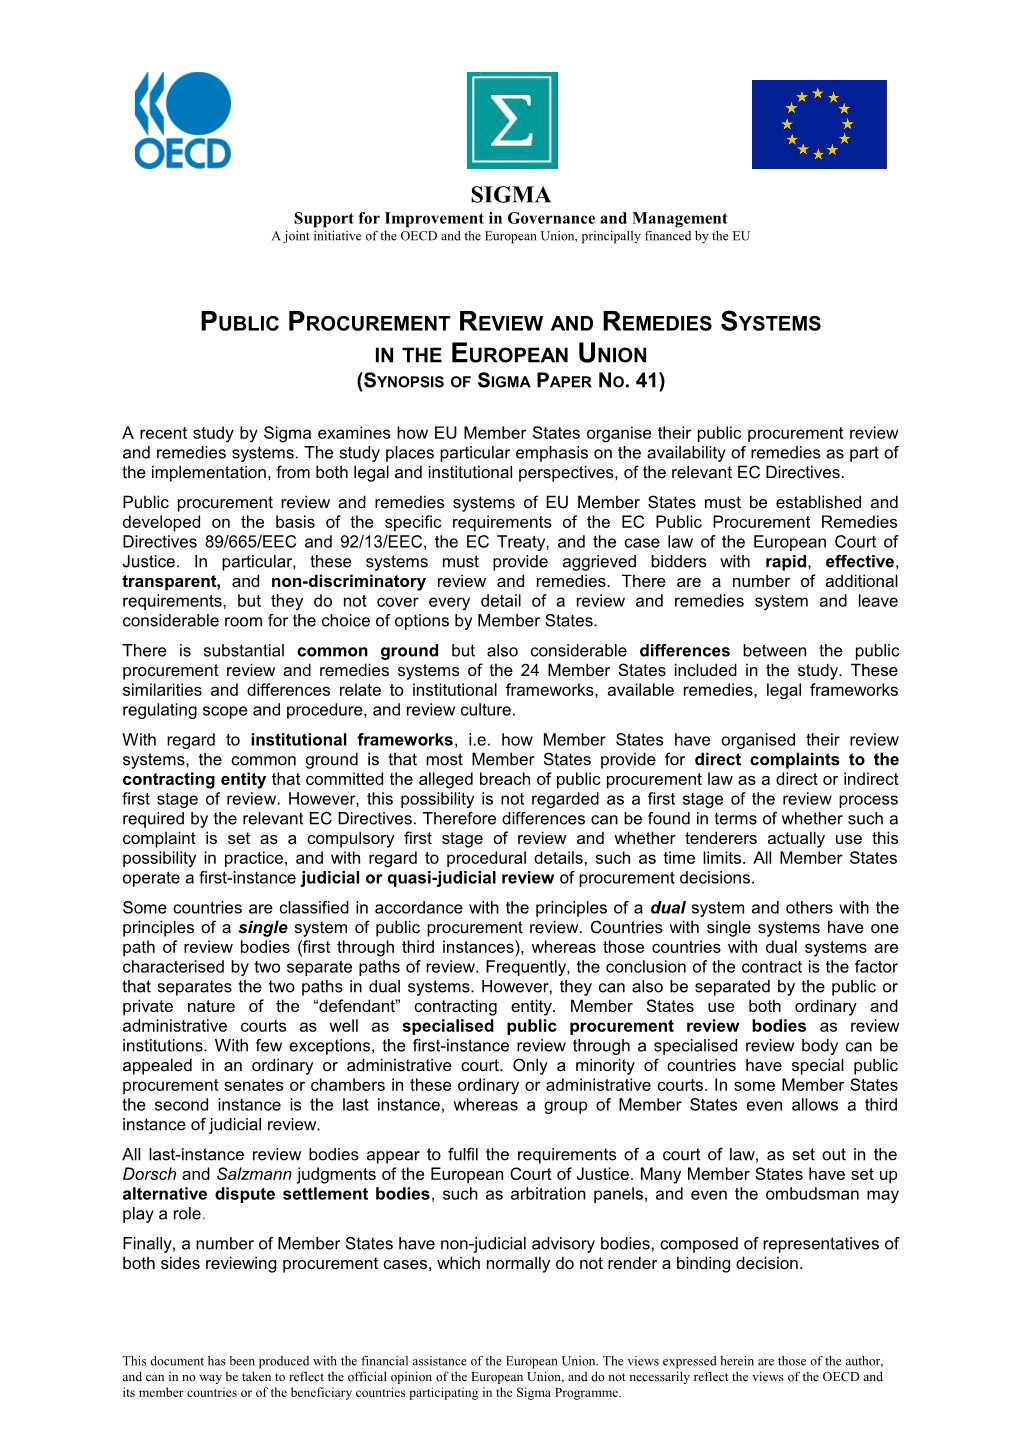 Public Procurement Review and Remedies Systems in the European Union (Synopsis of Sigma